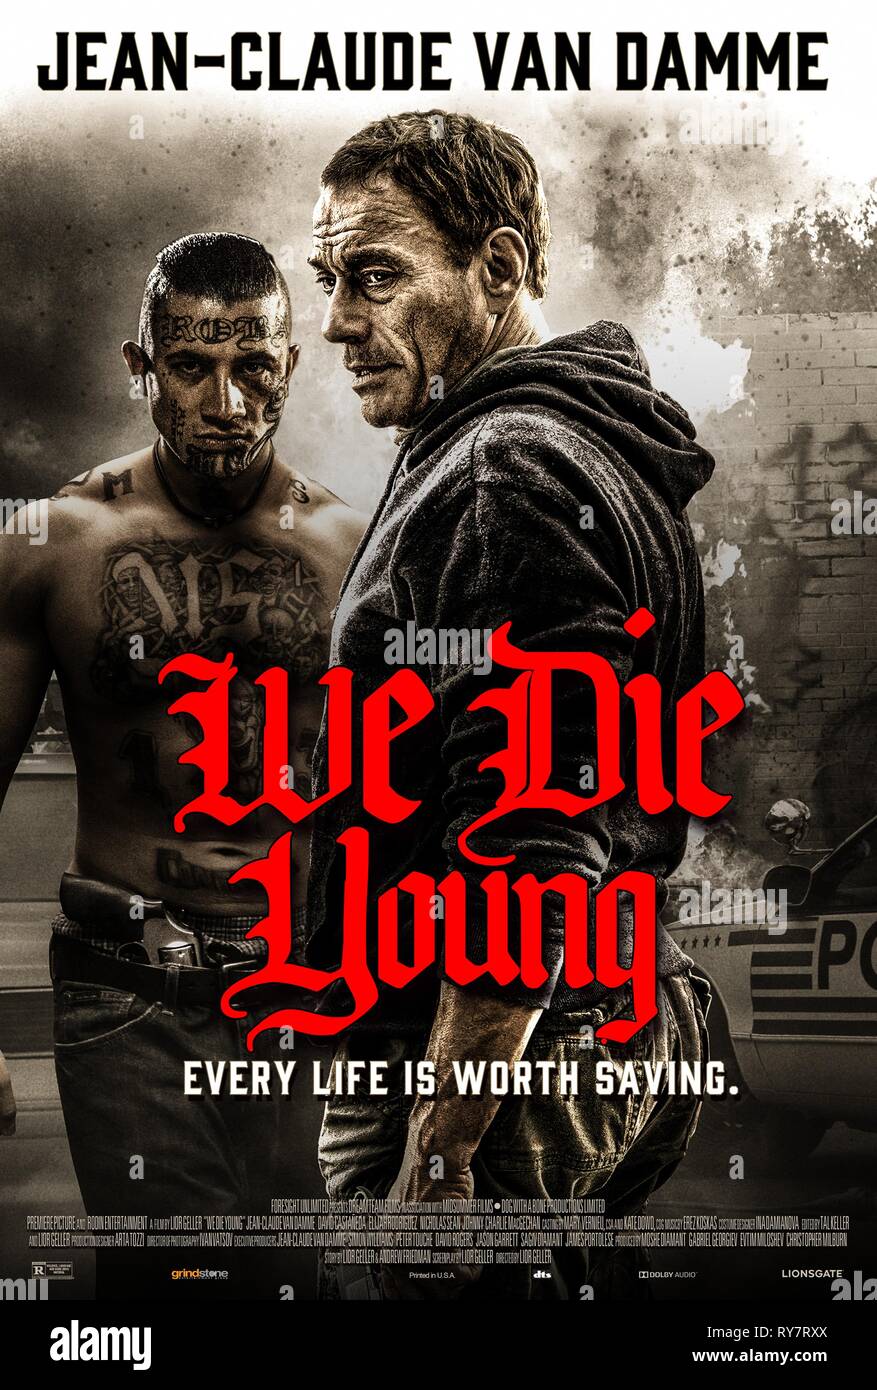 RELEASE DATE: March 1, 2019 TITLE: We Die Young STUDIO: Lionsgate DIRECTOR: Lior Geller PLOT: Lucas, a 14-year-old boy inducted into the gang life in Washington, D.C., is determined that his 10-year-old brother won't follow the same path. When an Afghanistan war veteran comes into the neighborhood, an opportunity arises. STARRING: JEAN-CLAUDE VAN DAMME as Daniel Poster art. (Credit Image: © Lionsgate/Entertainment Pictures) Stock Photo